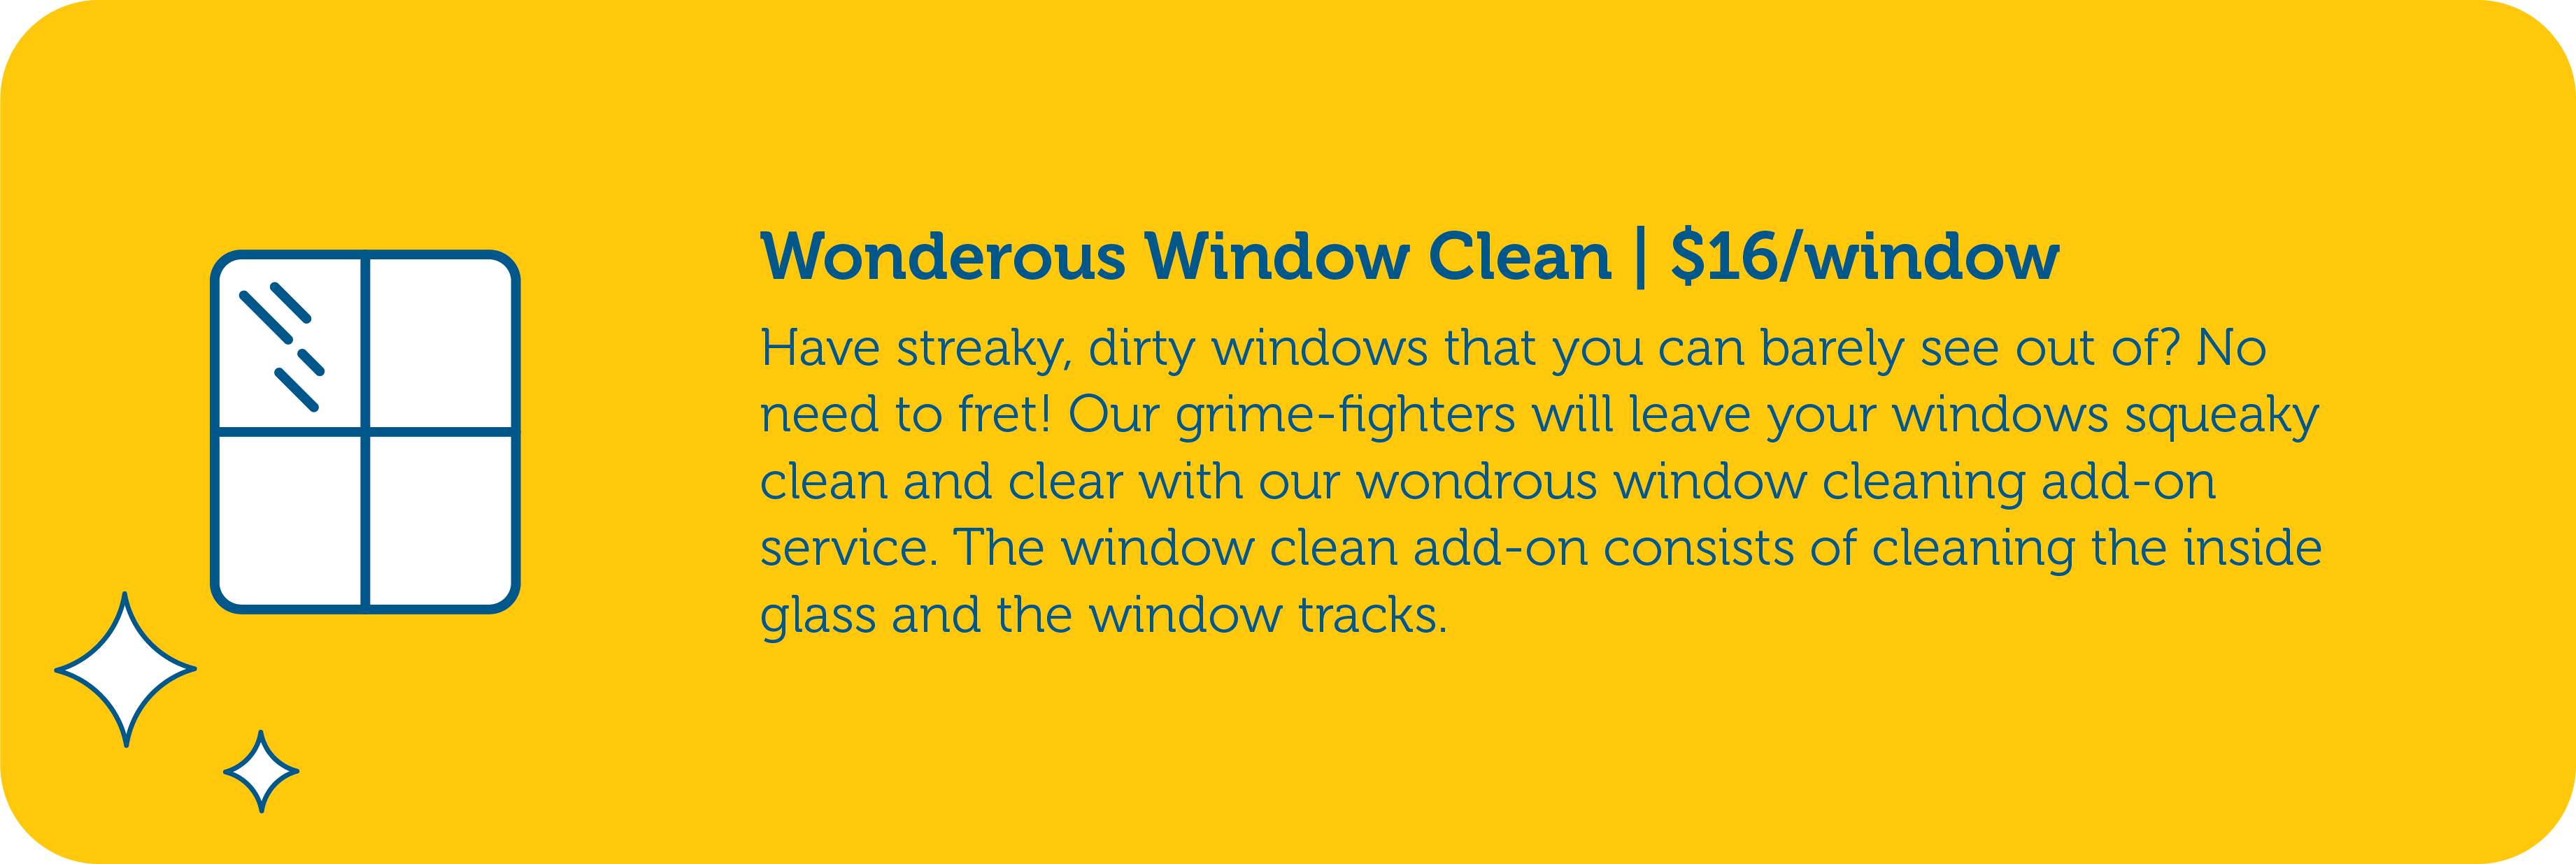 Graphic highlighting what's included in the window cleaning add on service